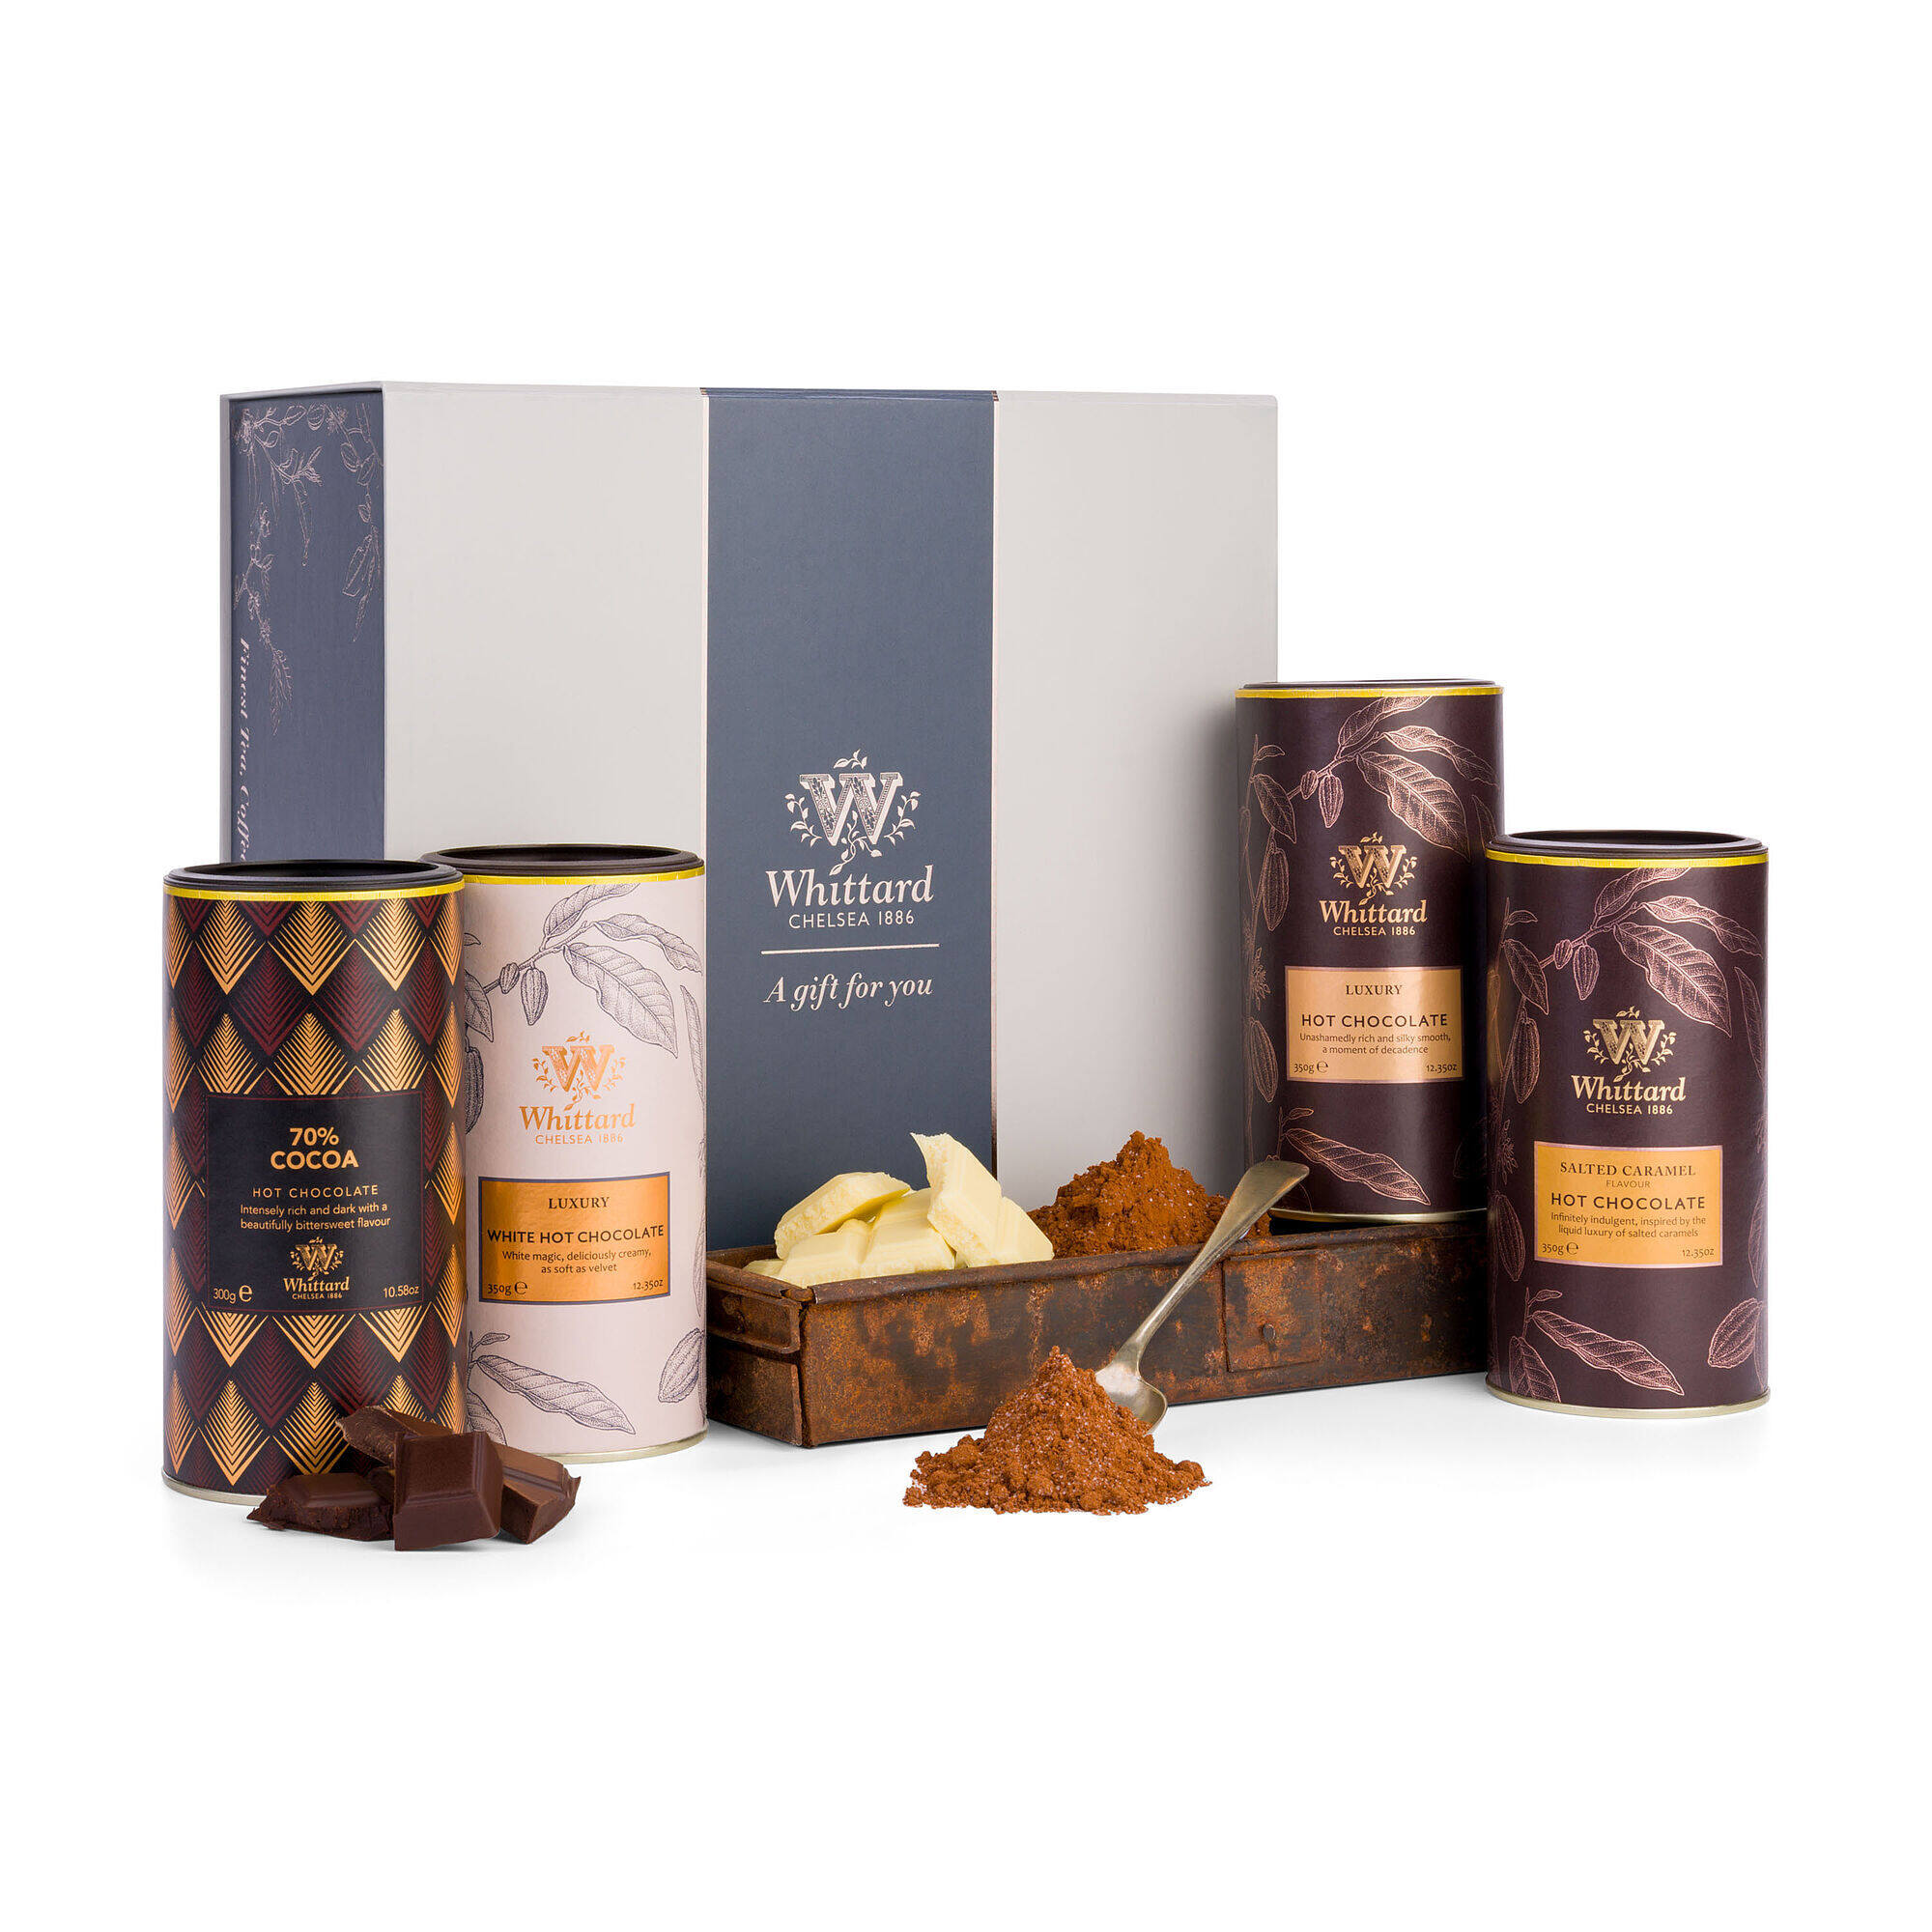 The Hot Chocolate Discovery Gift Box